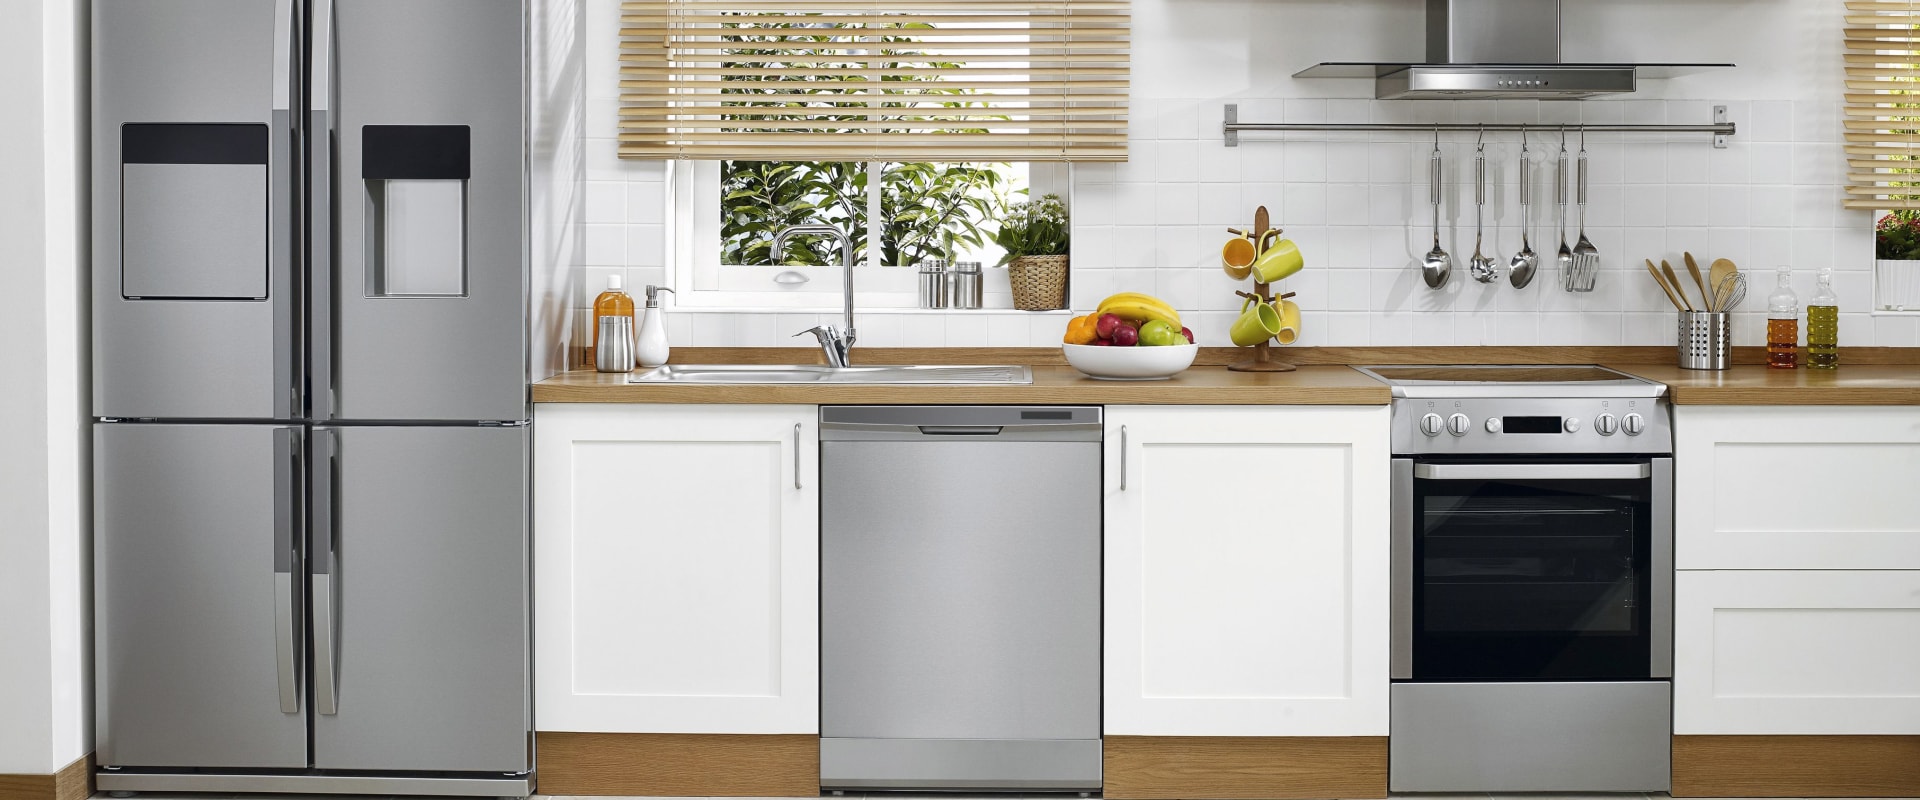 What are 4 large kitchen appliances that are commonly used?